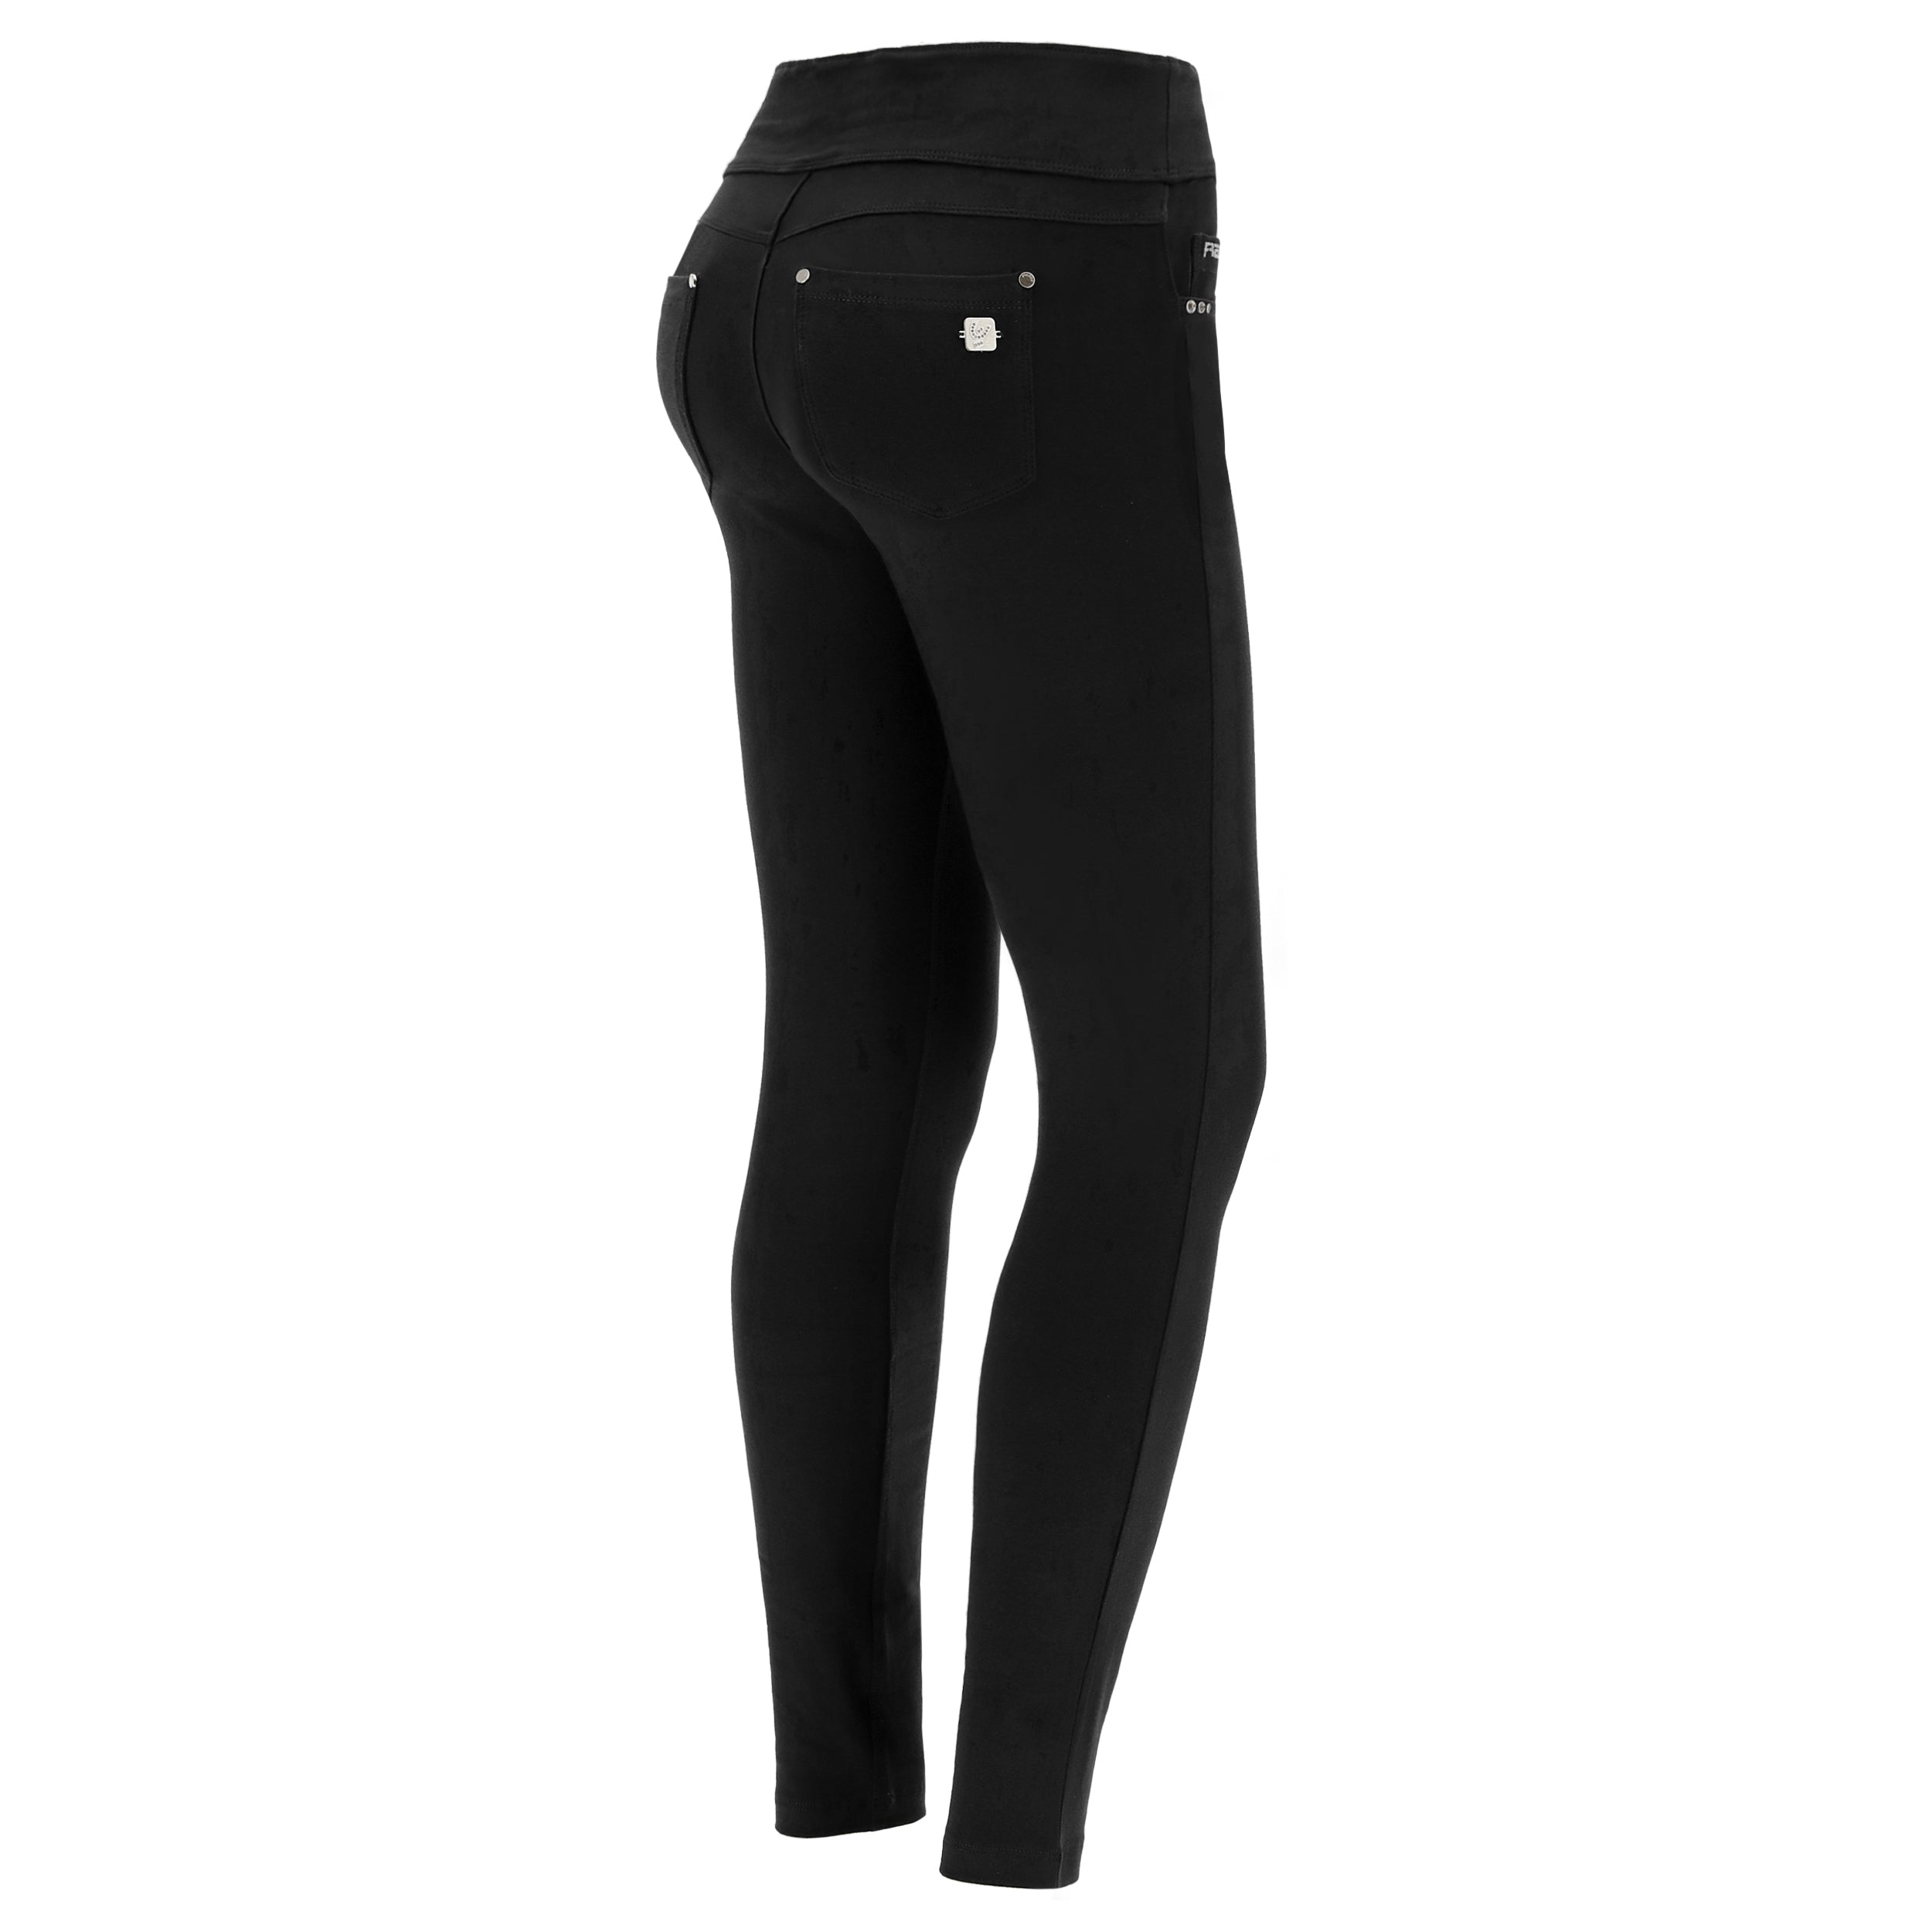 (NOWY1MC001-N) SLIM-FIT N.O.W.® COTTON BLACK PANTS WITH A FOLDABLE WAIST